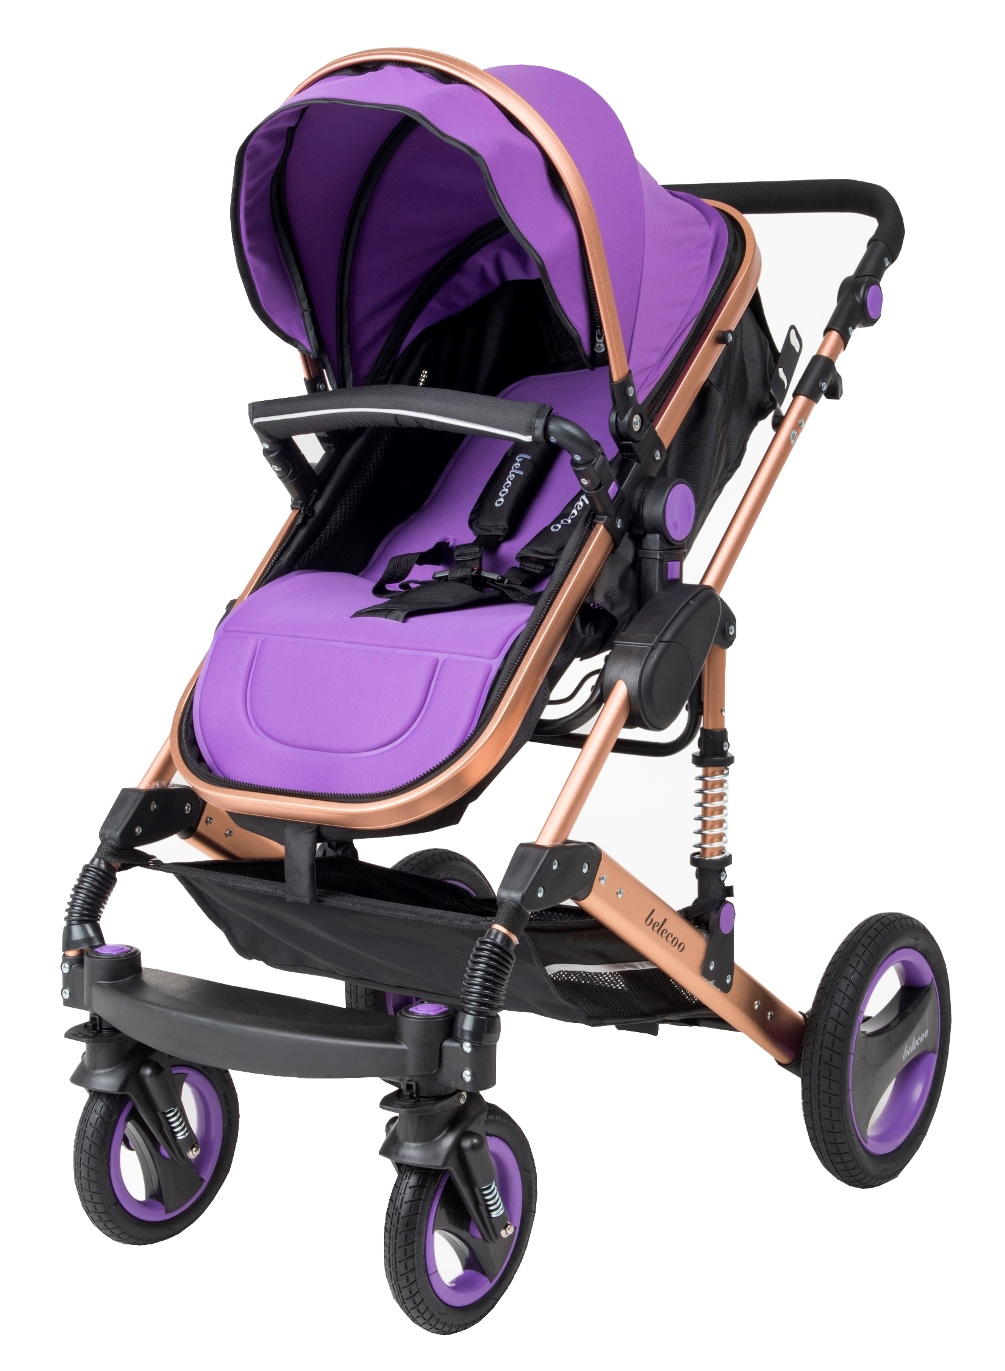 graco extend to fit forward facing